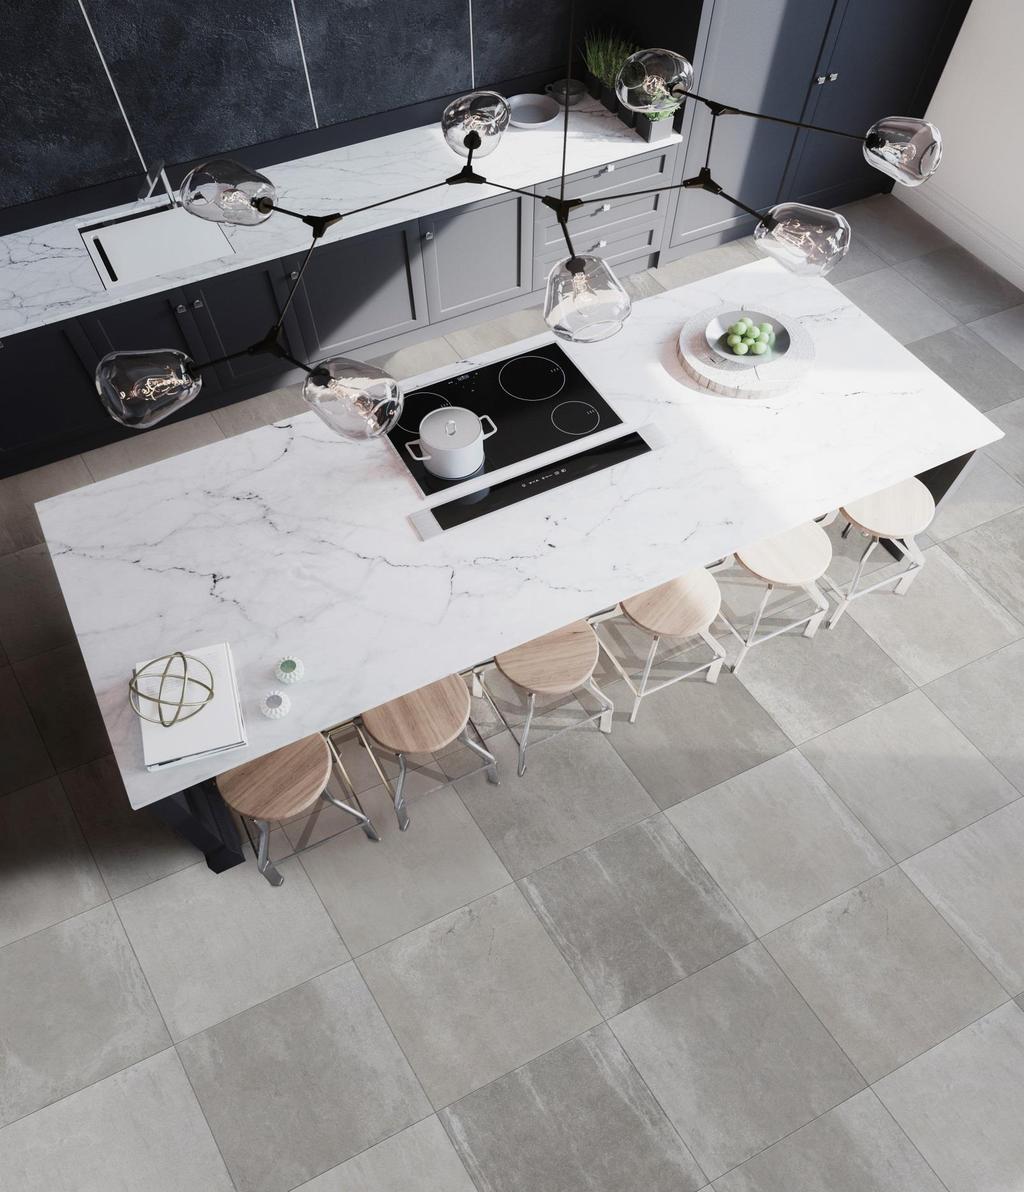 RAINSTONE PORCELAIN TILE The Rainstone Collection is offered in a 12" x 24", 24" x 24"